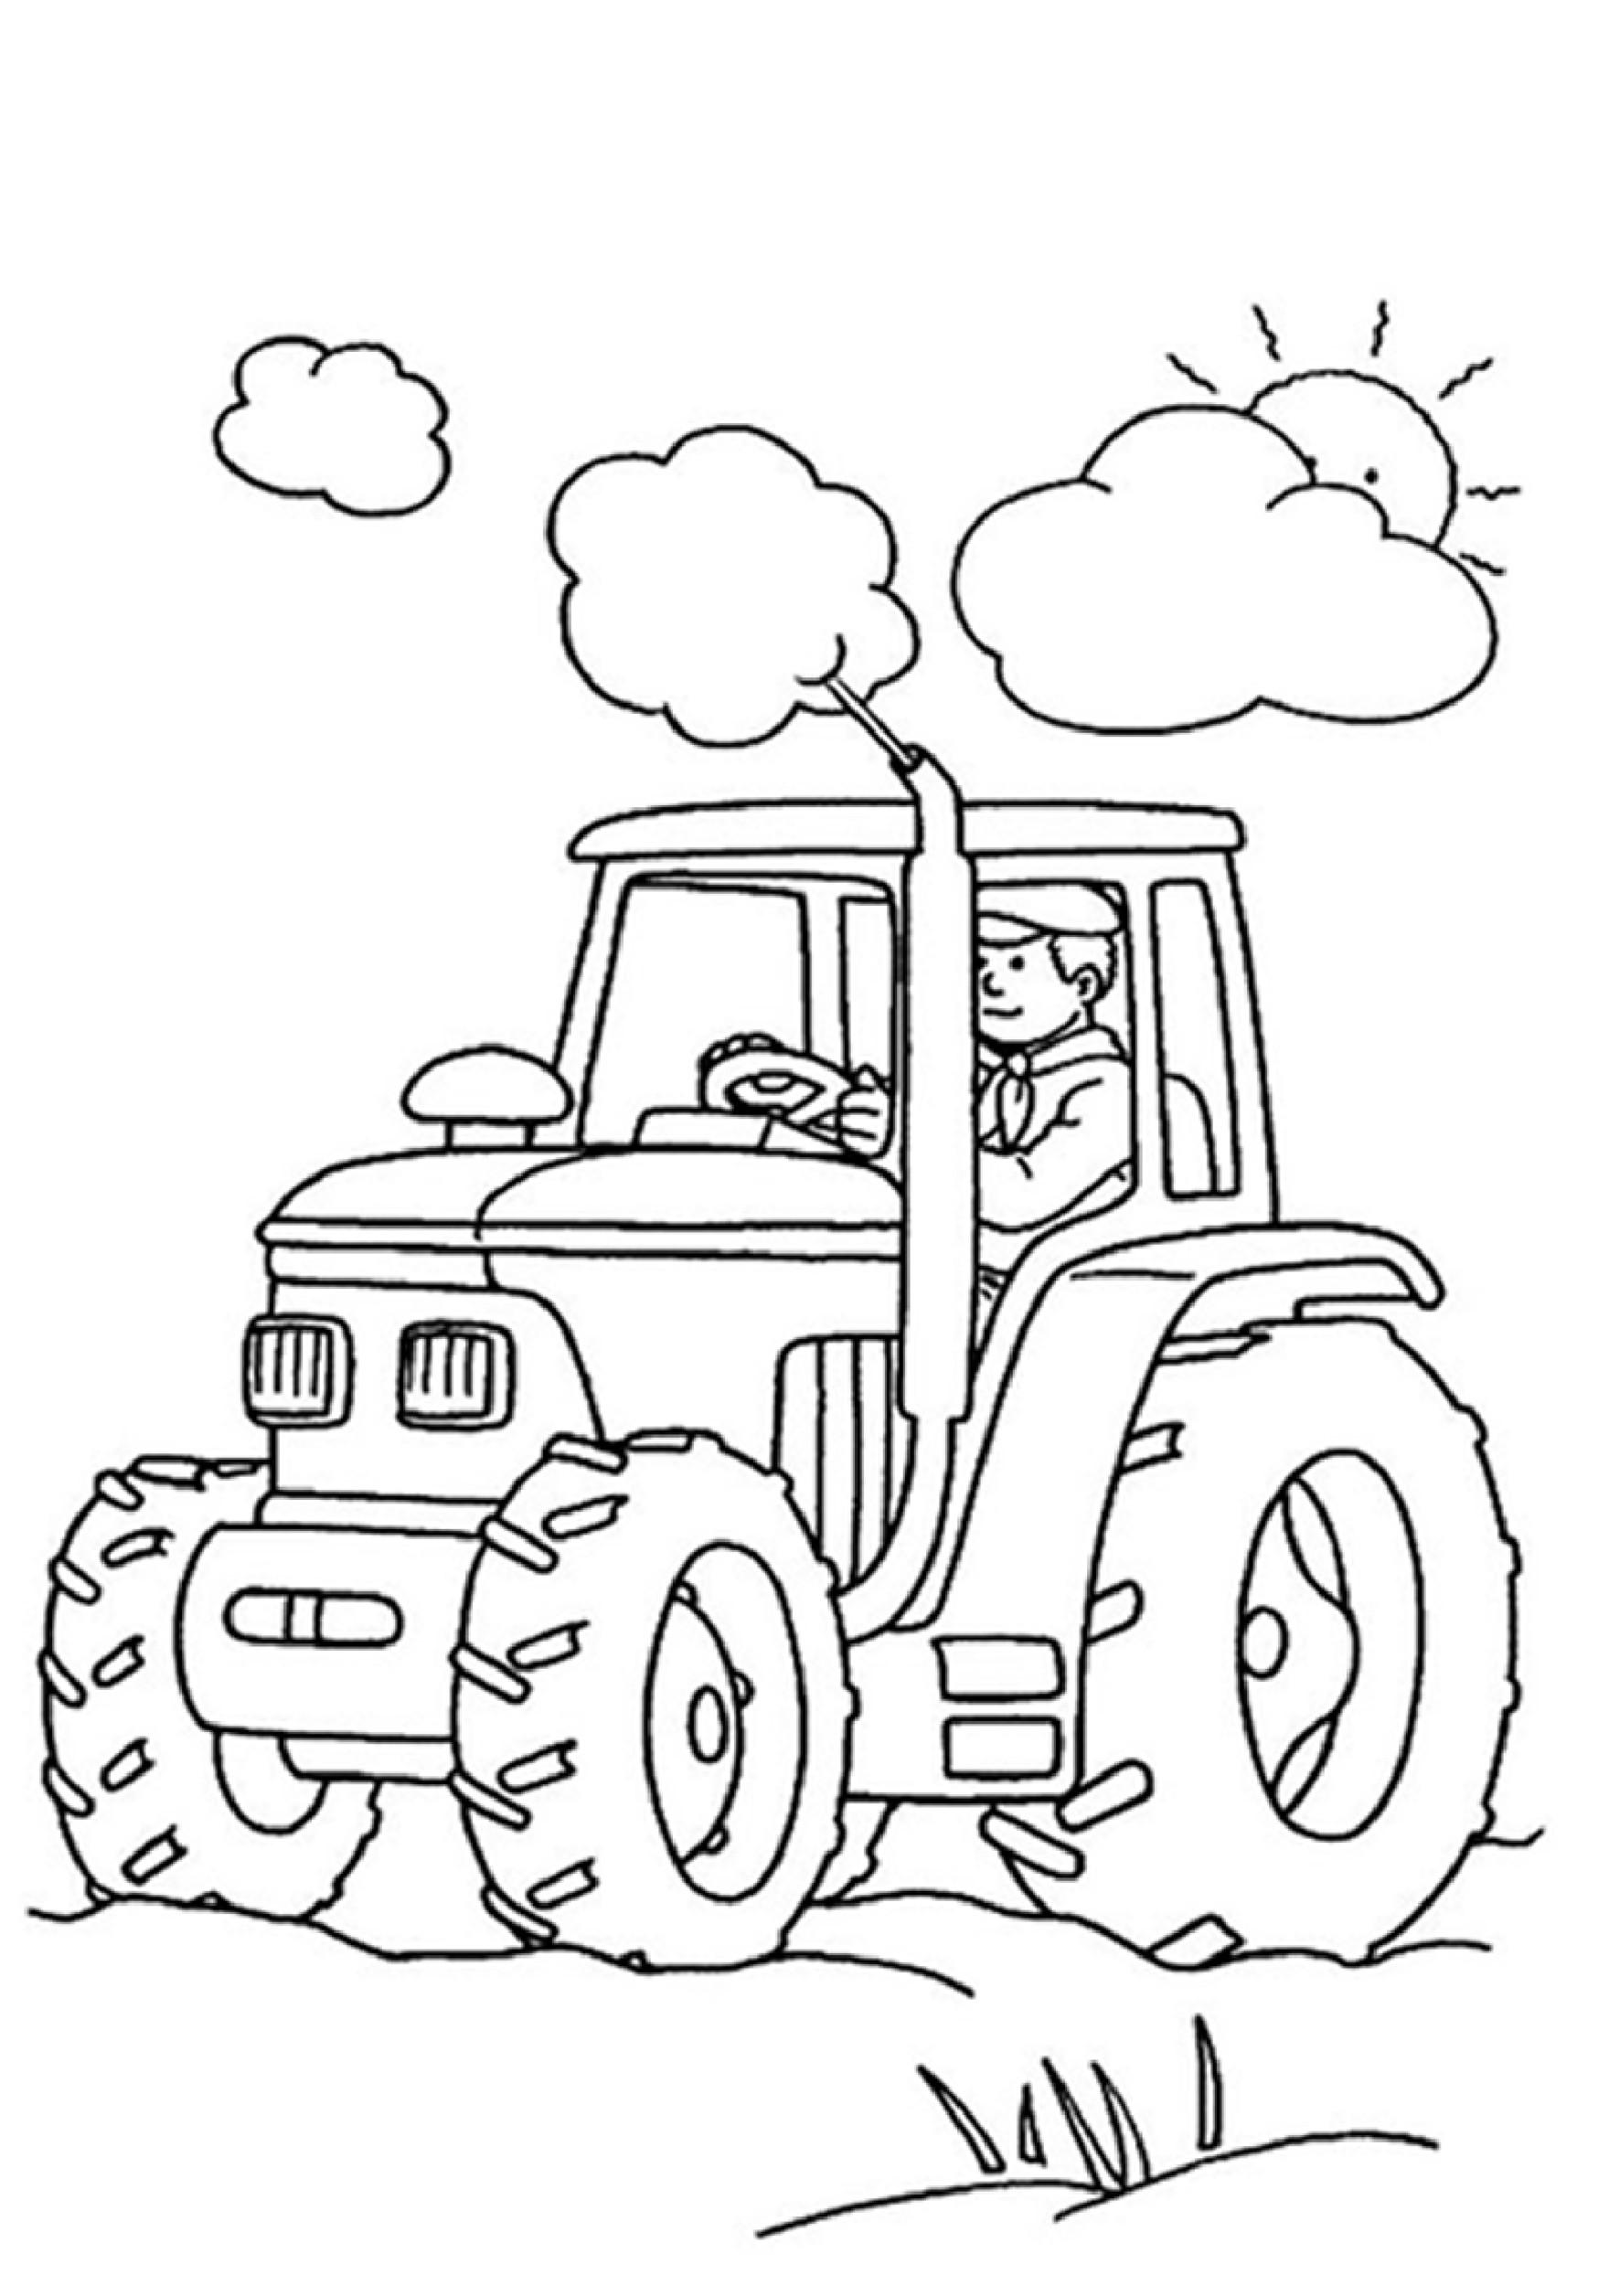 20 Of the Best Ideas for toddler Boy Coloring Pages - Home, Family